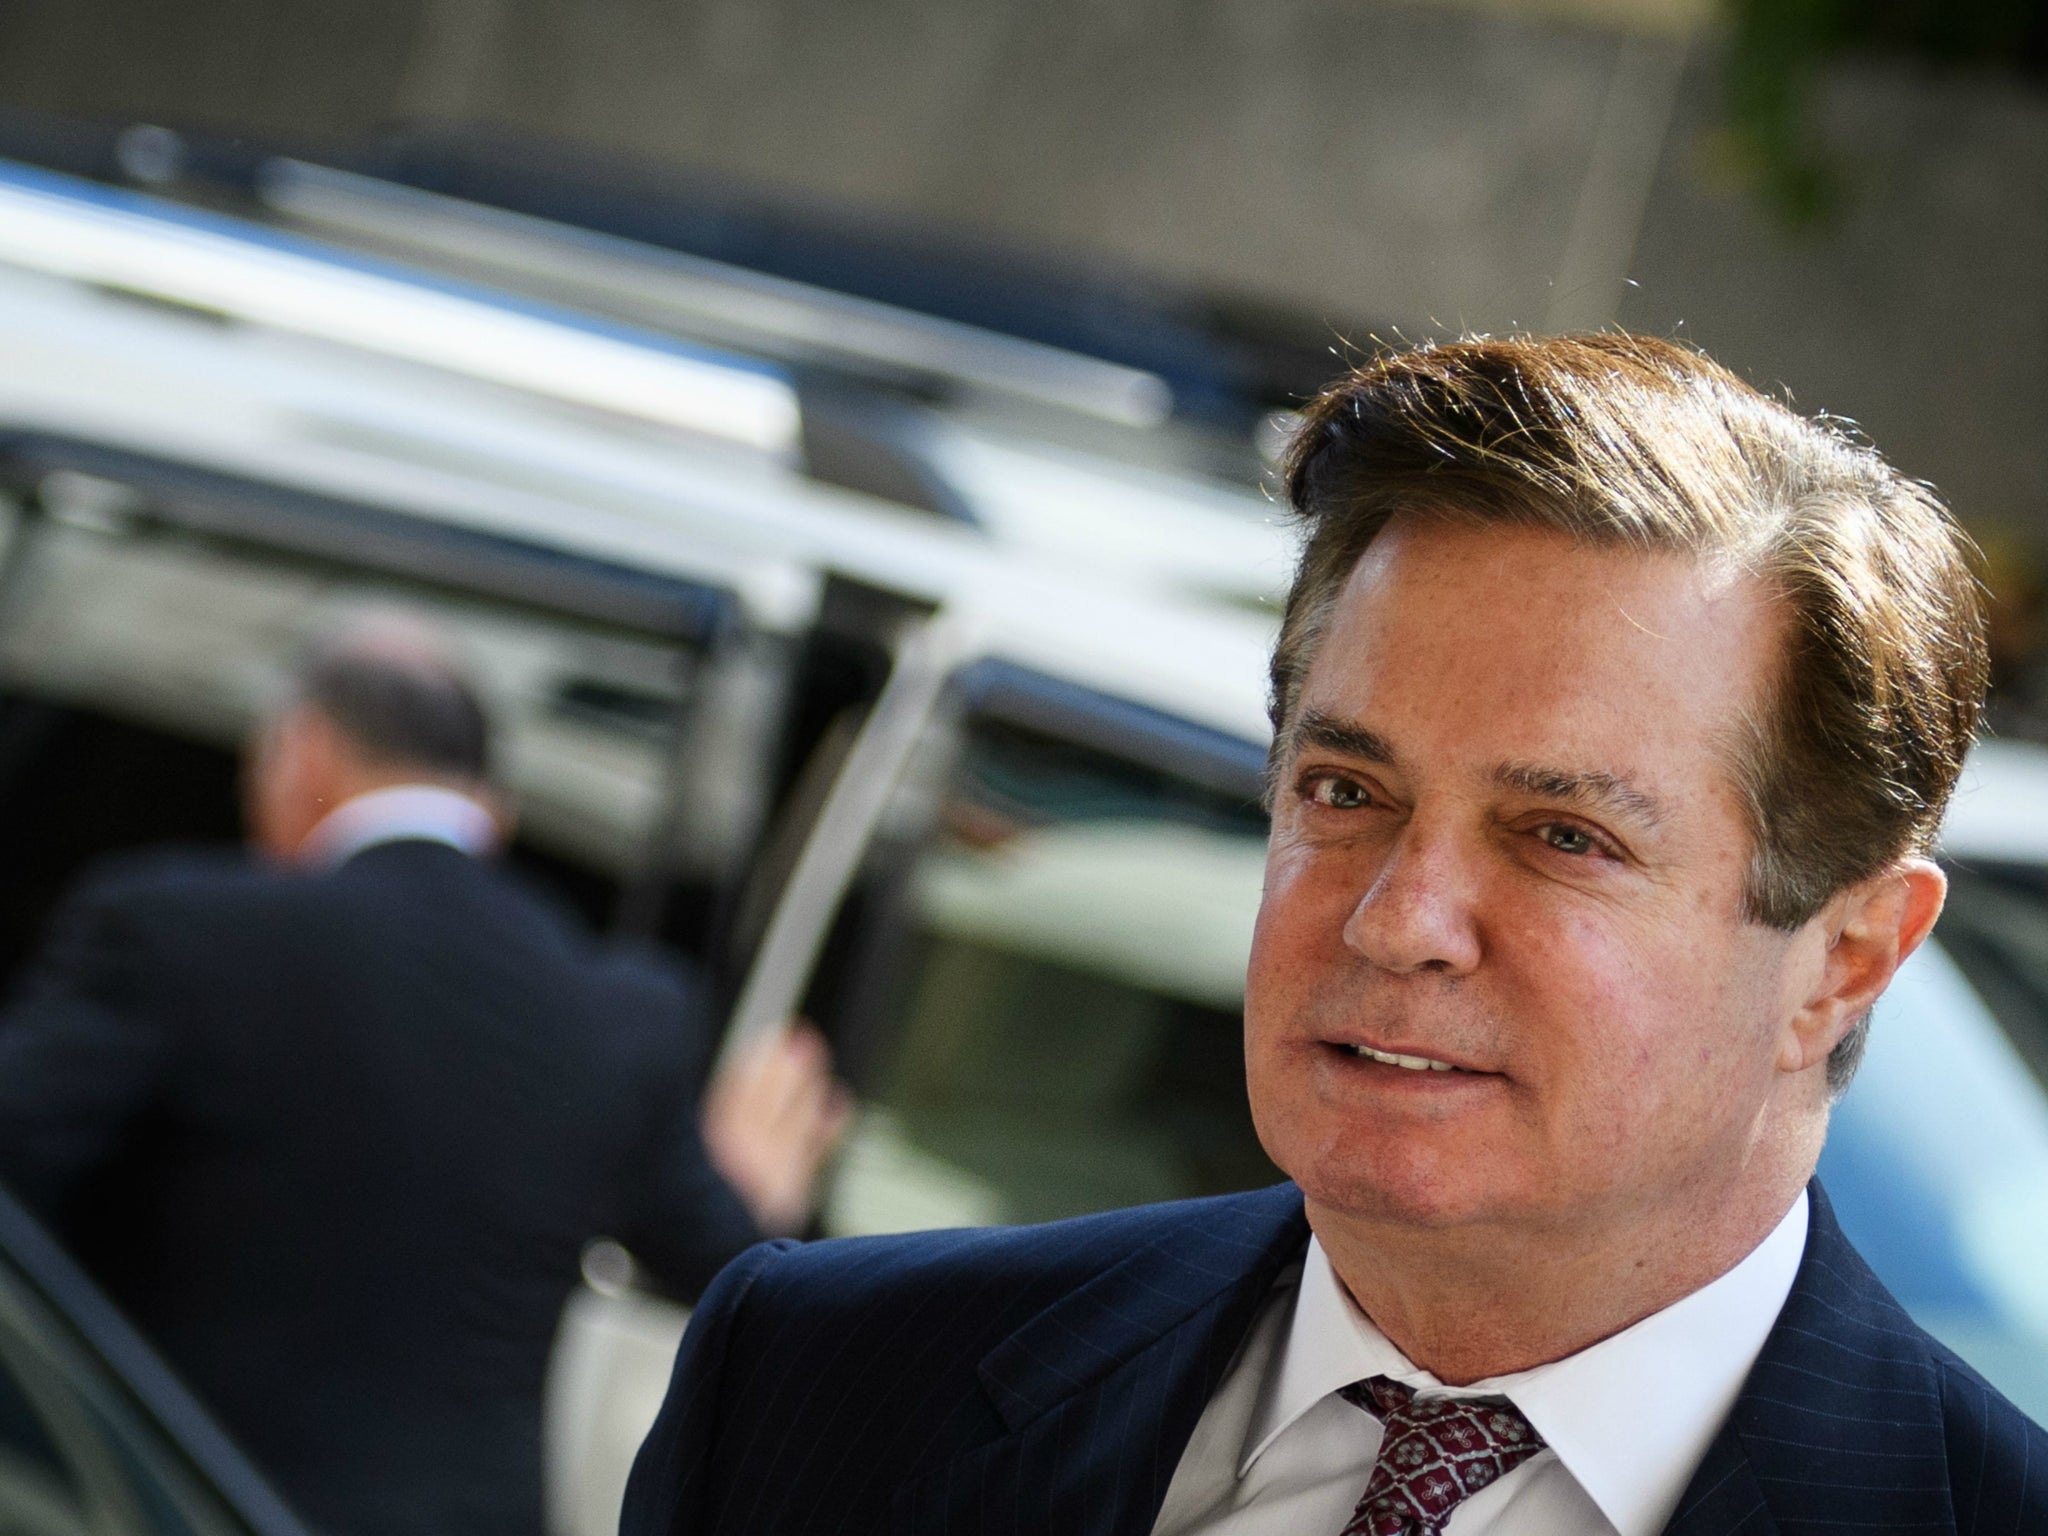 Paul Manafort, US President Donald Trump's former 2016 campaign manager, is on trial beginning 31 July 2018 in Virginia.